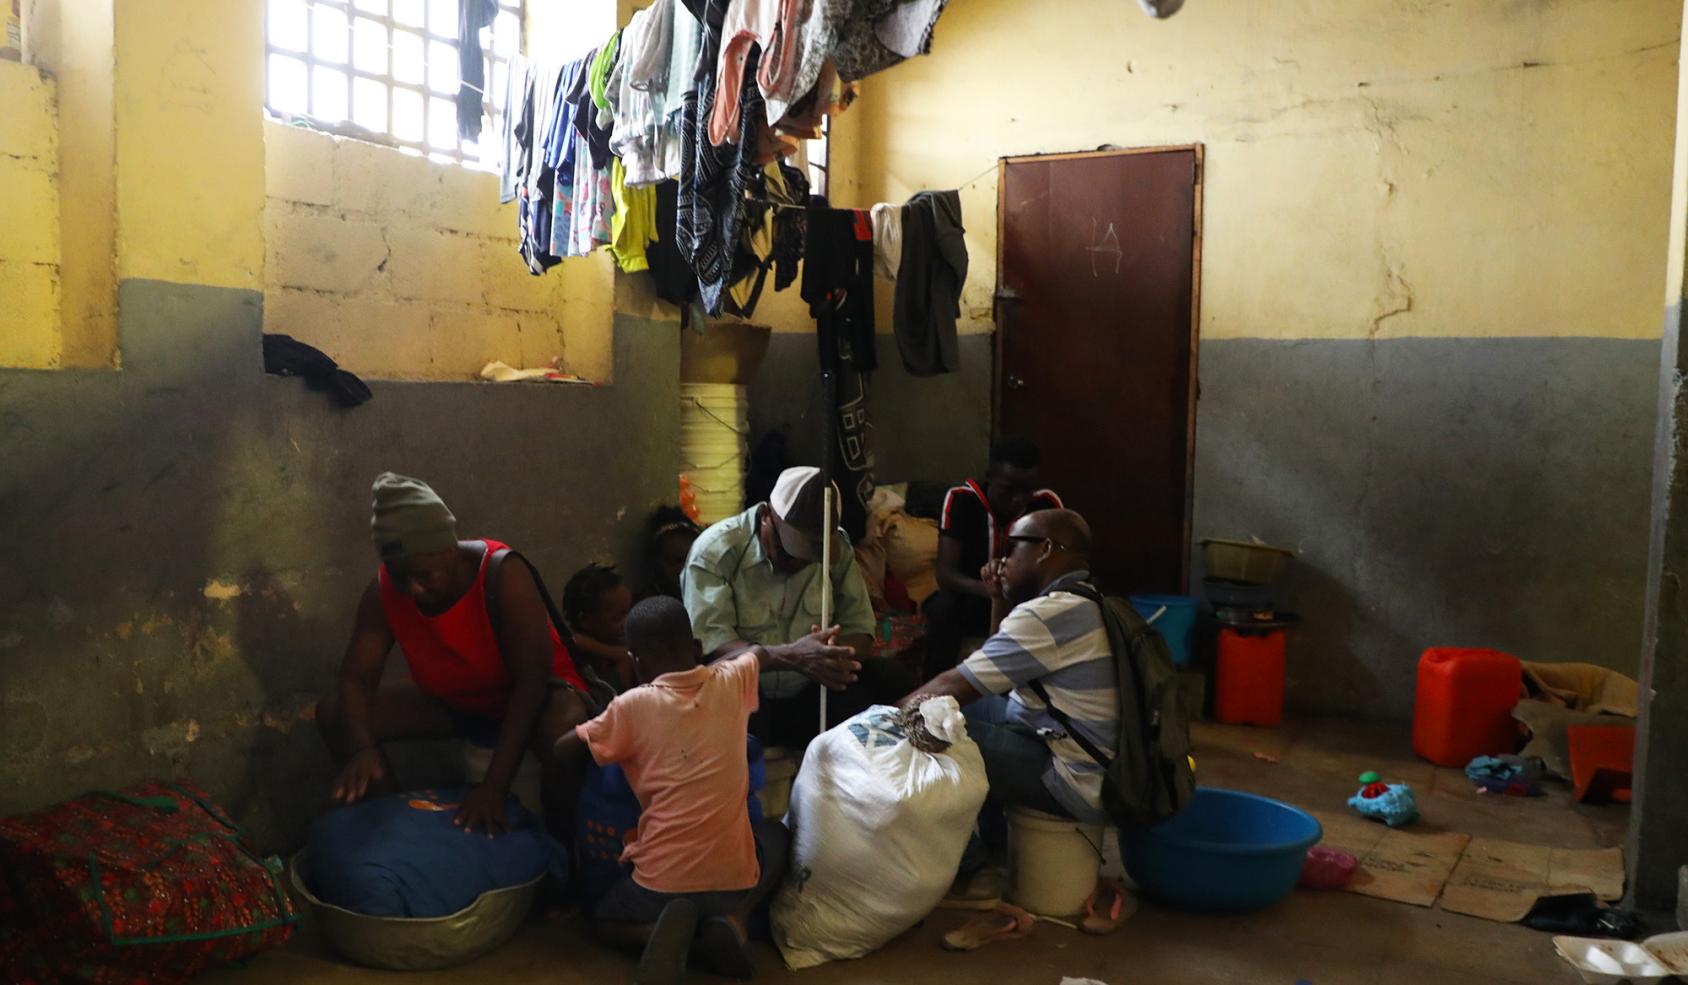 Three men, a woman and two children sit together underneath clothing lines of washed, hanging clothes.